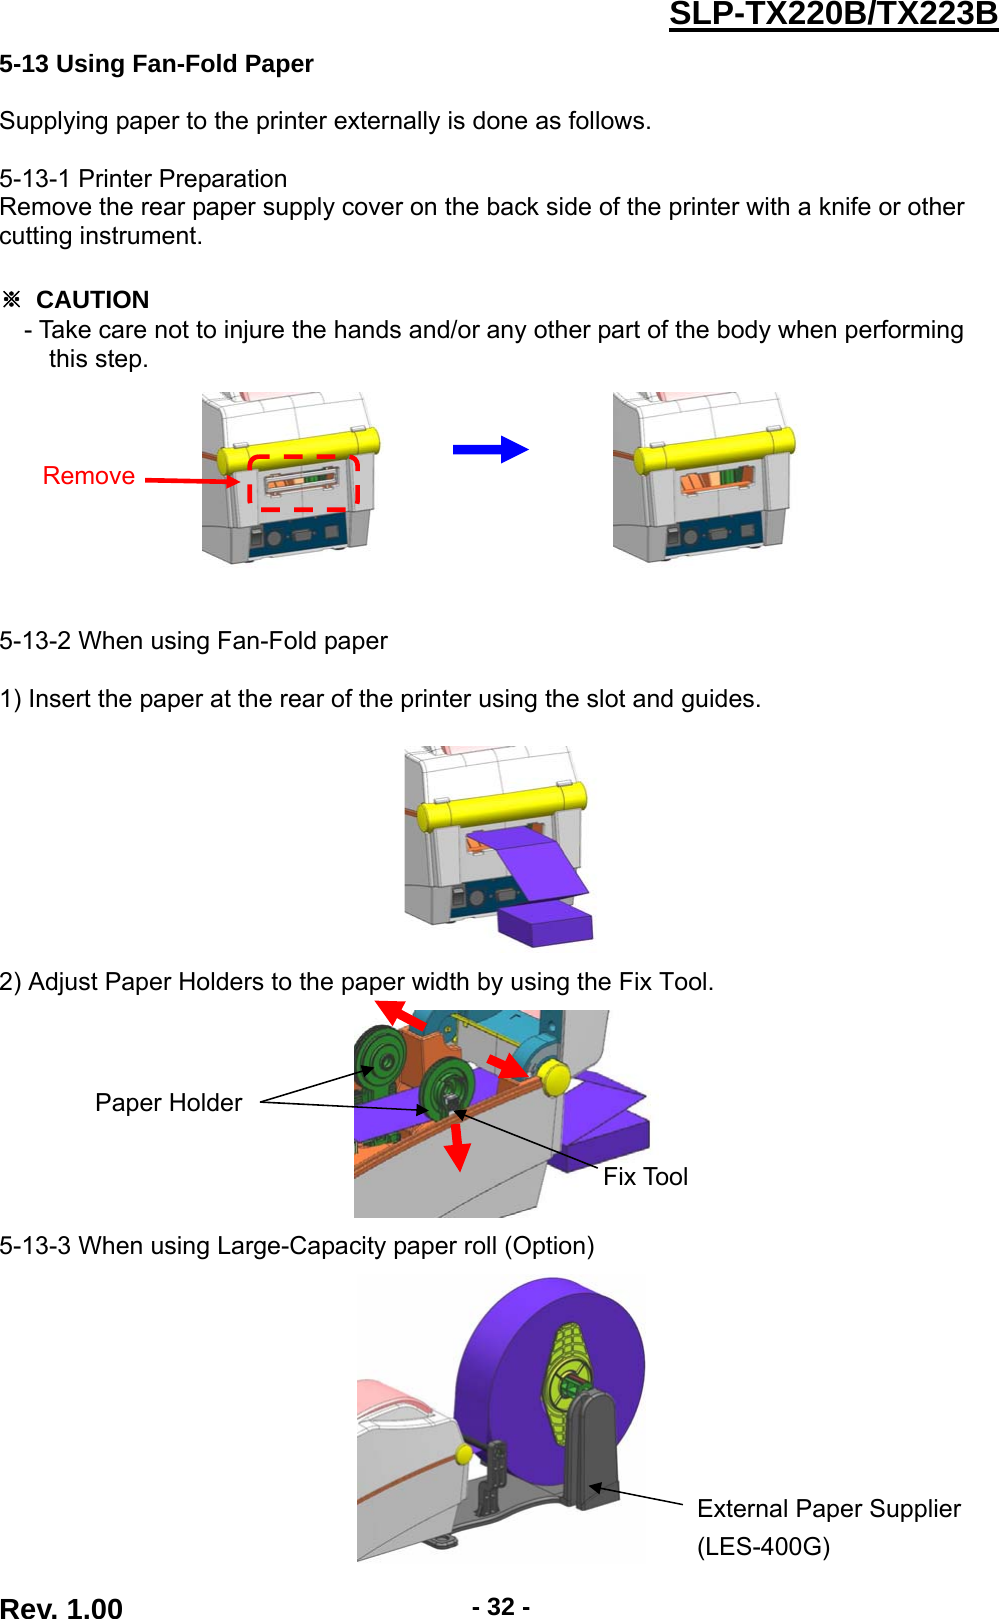  Rev. 1.00  - 32 -SLP-TX220B/TX223B5-13 Using Fan-Fold Paper  Supplying paper to the printer externally is done as follows.  5-13-1 Printer Preparation Remove the rear paper supply cover on the back side of the printer with a knife or other cutting instrument.  ※ CAUTION - Take care not to injure the hands and/or any other part of the body when performing   this step.                             5-13-2 When using Fan-Fold paper  1) Insert the paper at the rear of the printer using the slot and guides.     2) Adjust Paper Holders to the paper width by using the Fix Tool.      5-13-3 When using Large-Capacity paper roll (Option)   RemoveFix Tool Paper Holder External Paper Supplier (LES-400G) 